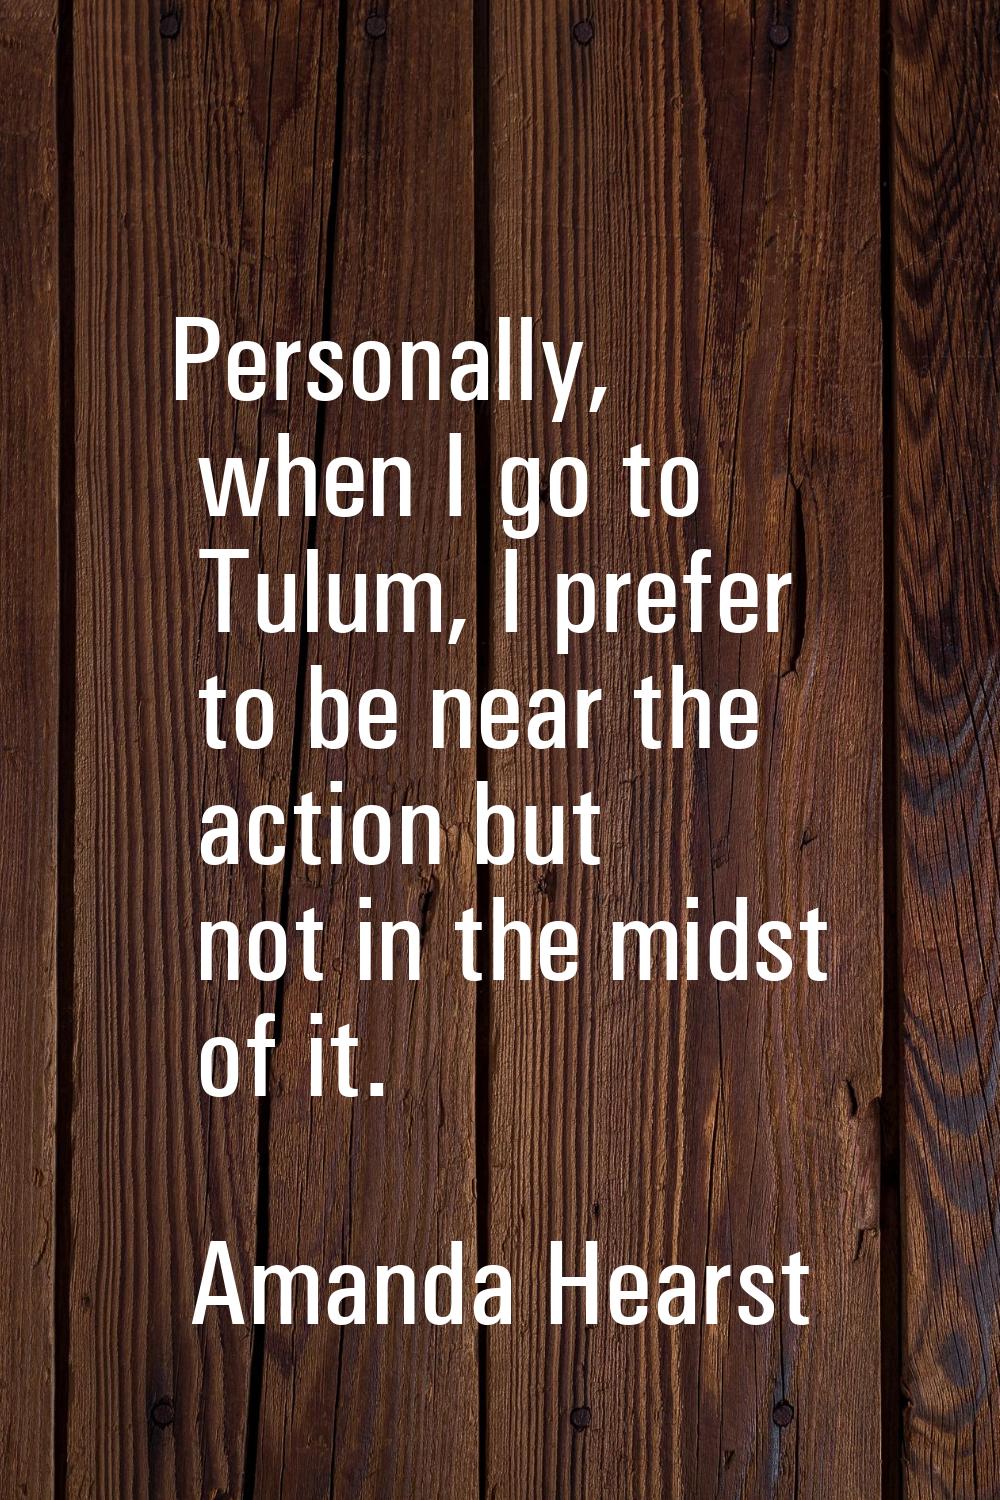 Personally, when I go to Tulum, I prefer to be near the action but not in the midst of it.